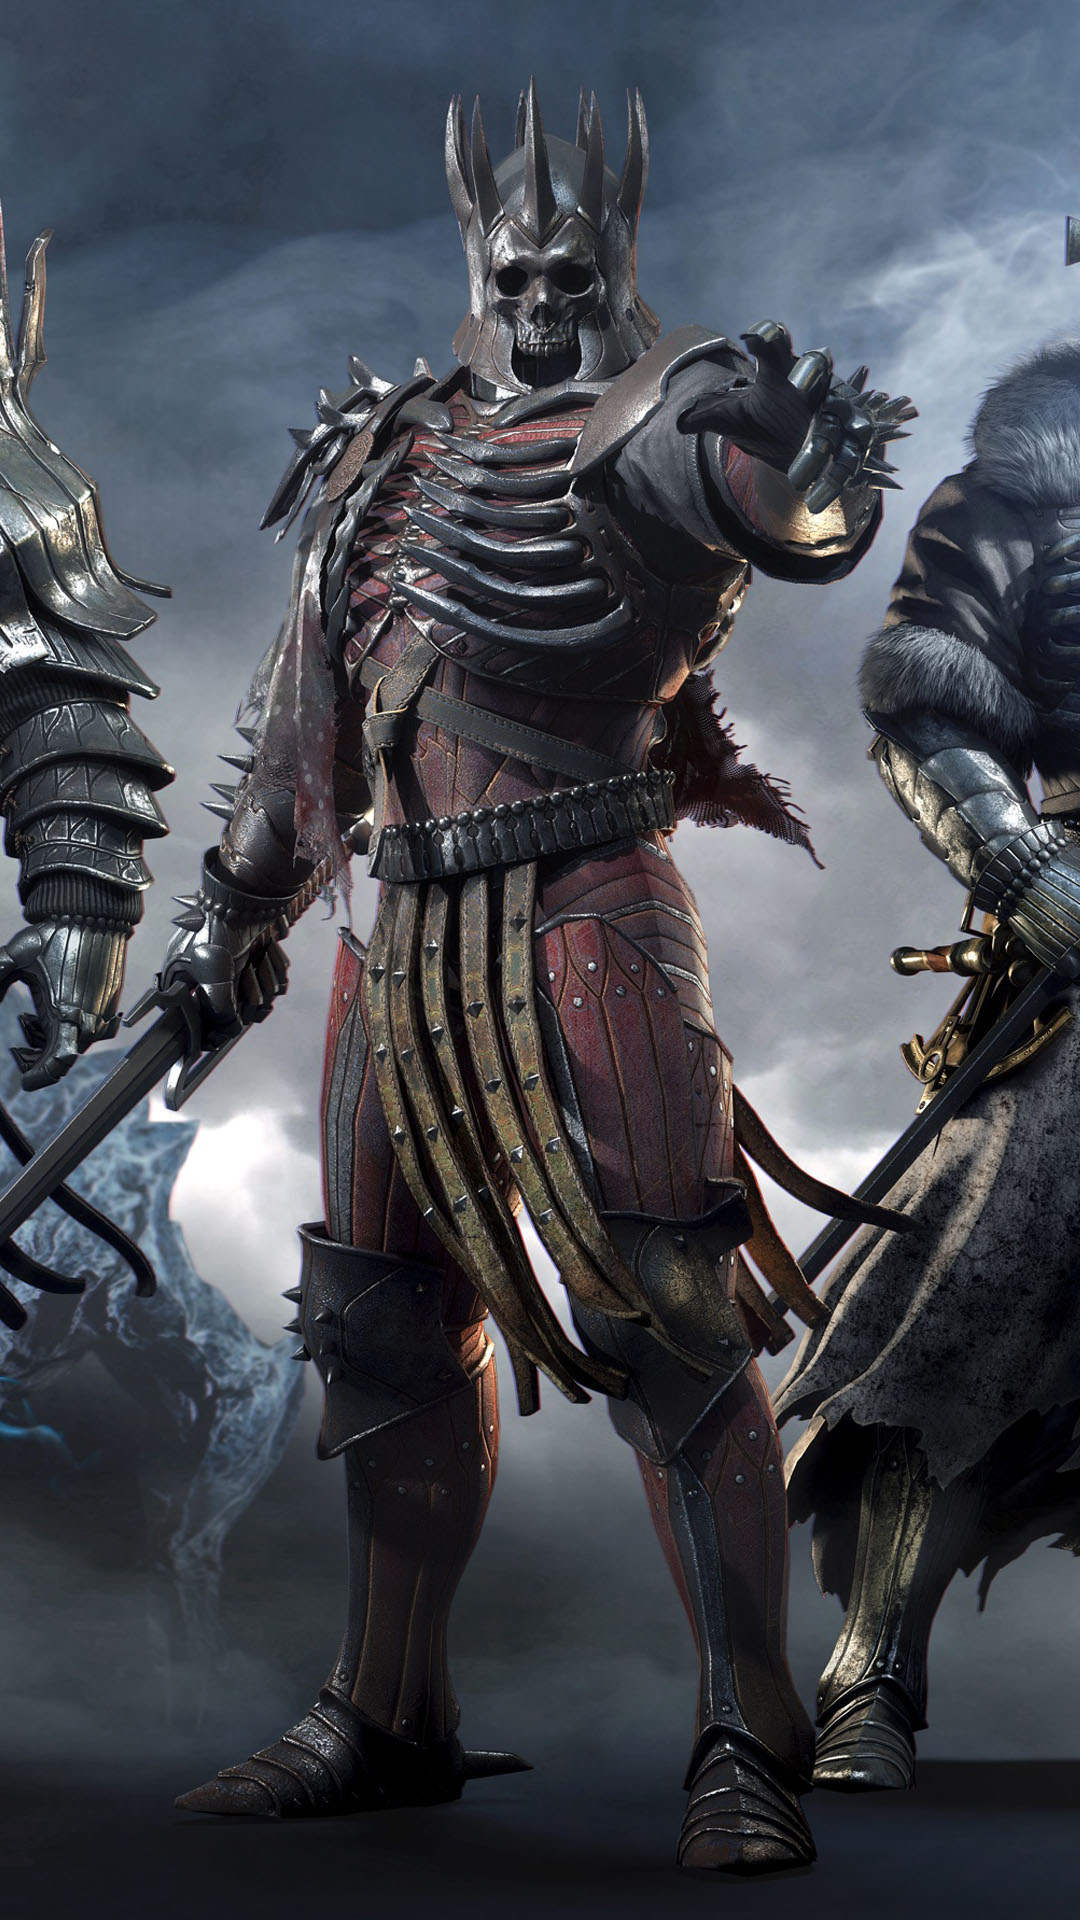 the witcher 3 iphone wallpaper,action adventure game,cg artwork,fictional character,armour,knight